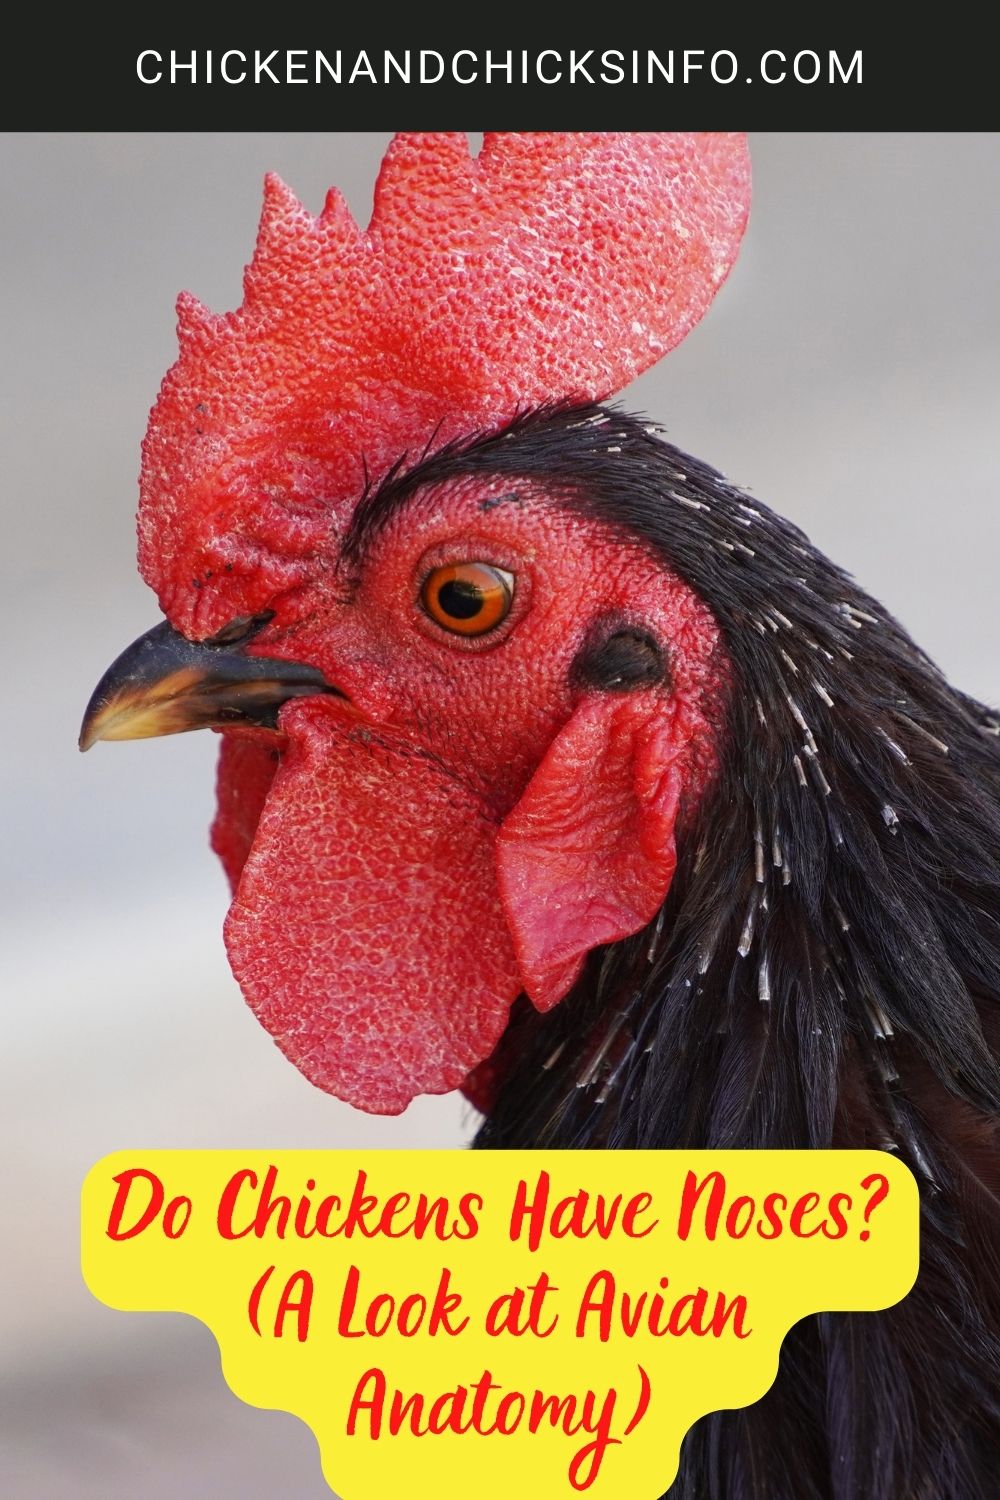 Do Chickens Have Noses? (A Look at Avian Anatomy) poster.
